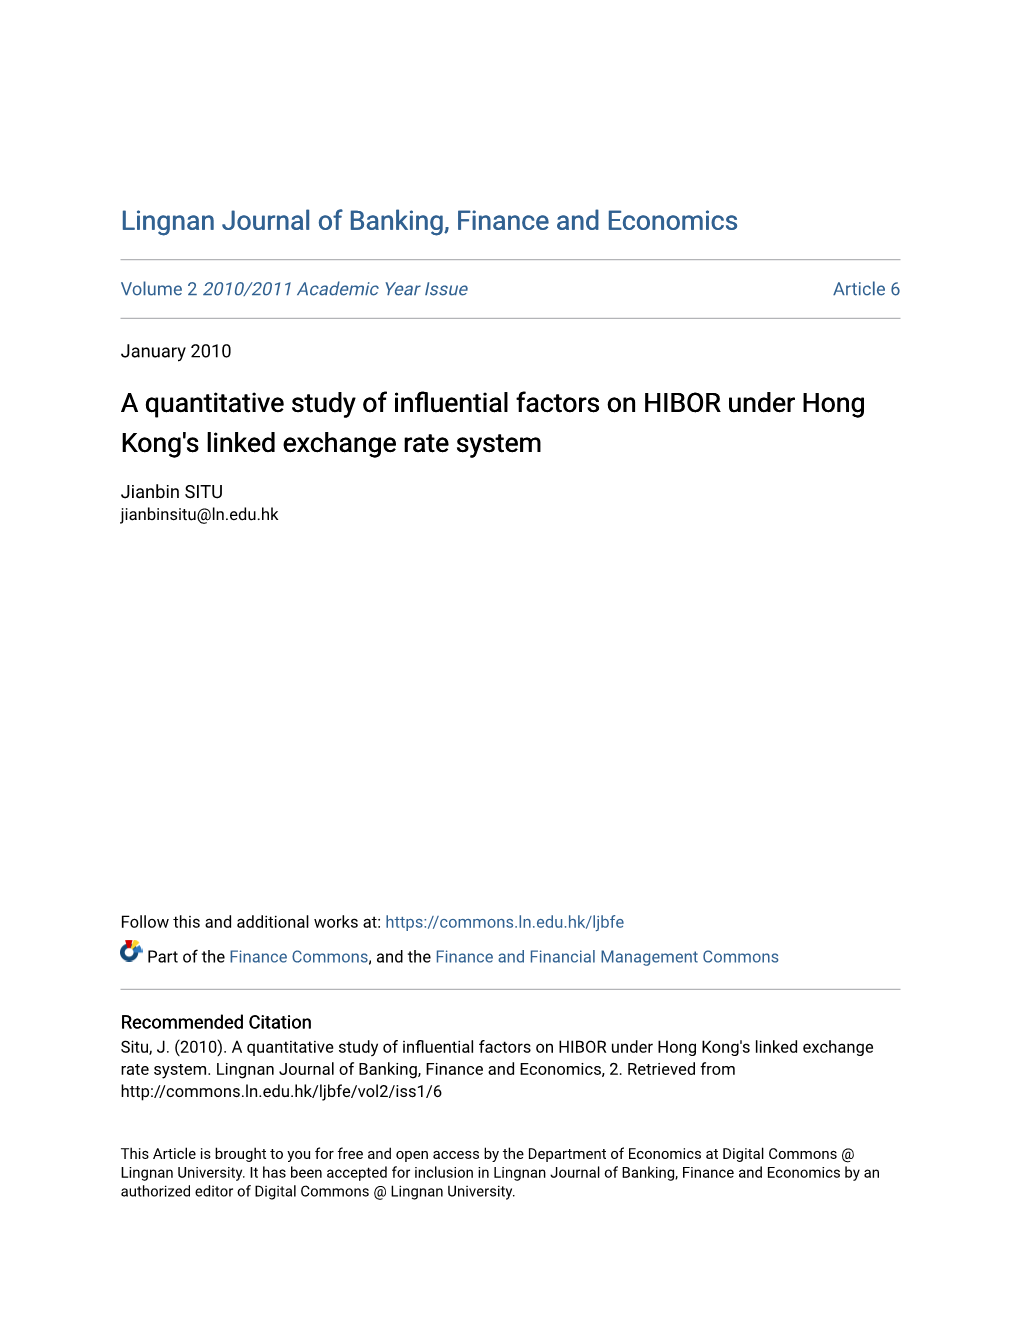 A Quantitative Study of Influential Factors on HIBOR Under Hong Kong's Linked Exchange Rate System